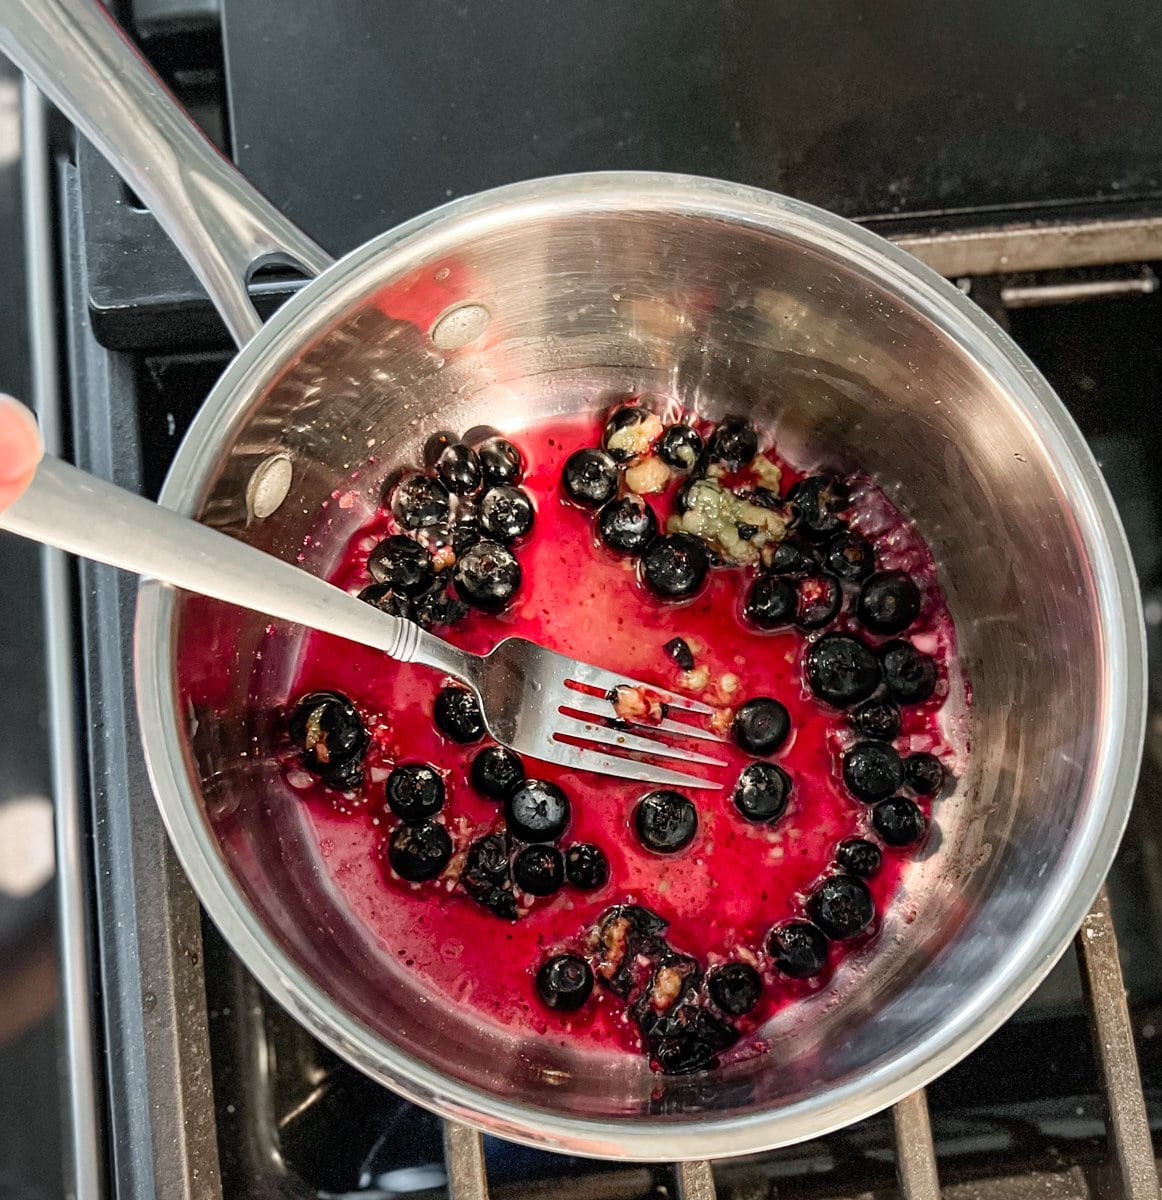 a stainless steel saucepan on a gas stove with blueberries cooking inside. a silver fork gently smashing the blueberries so they release their juices. 